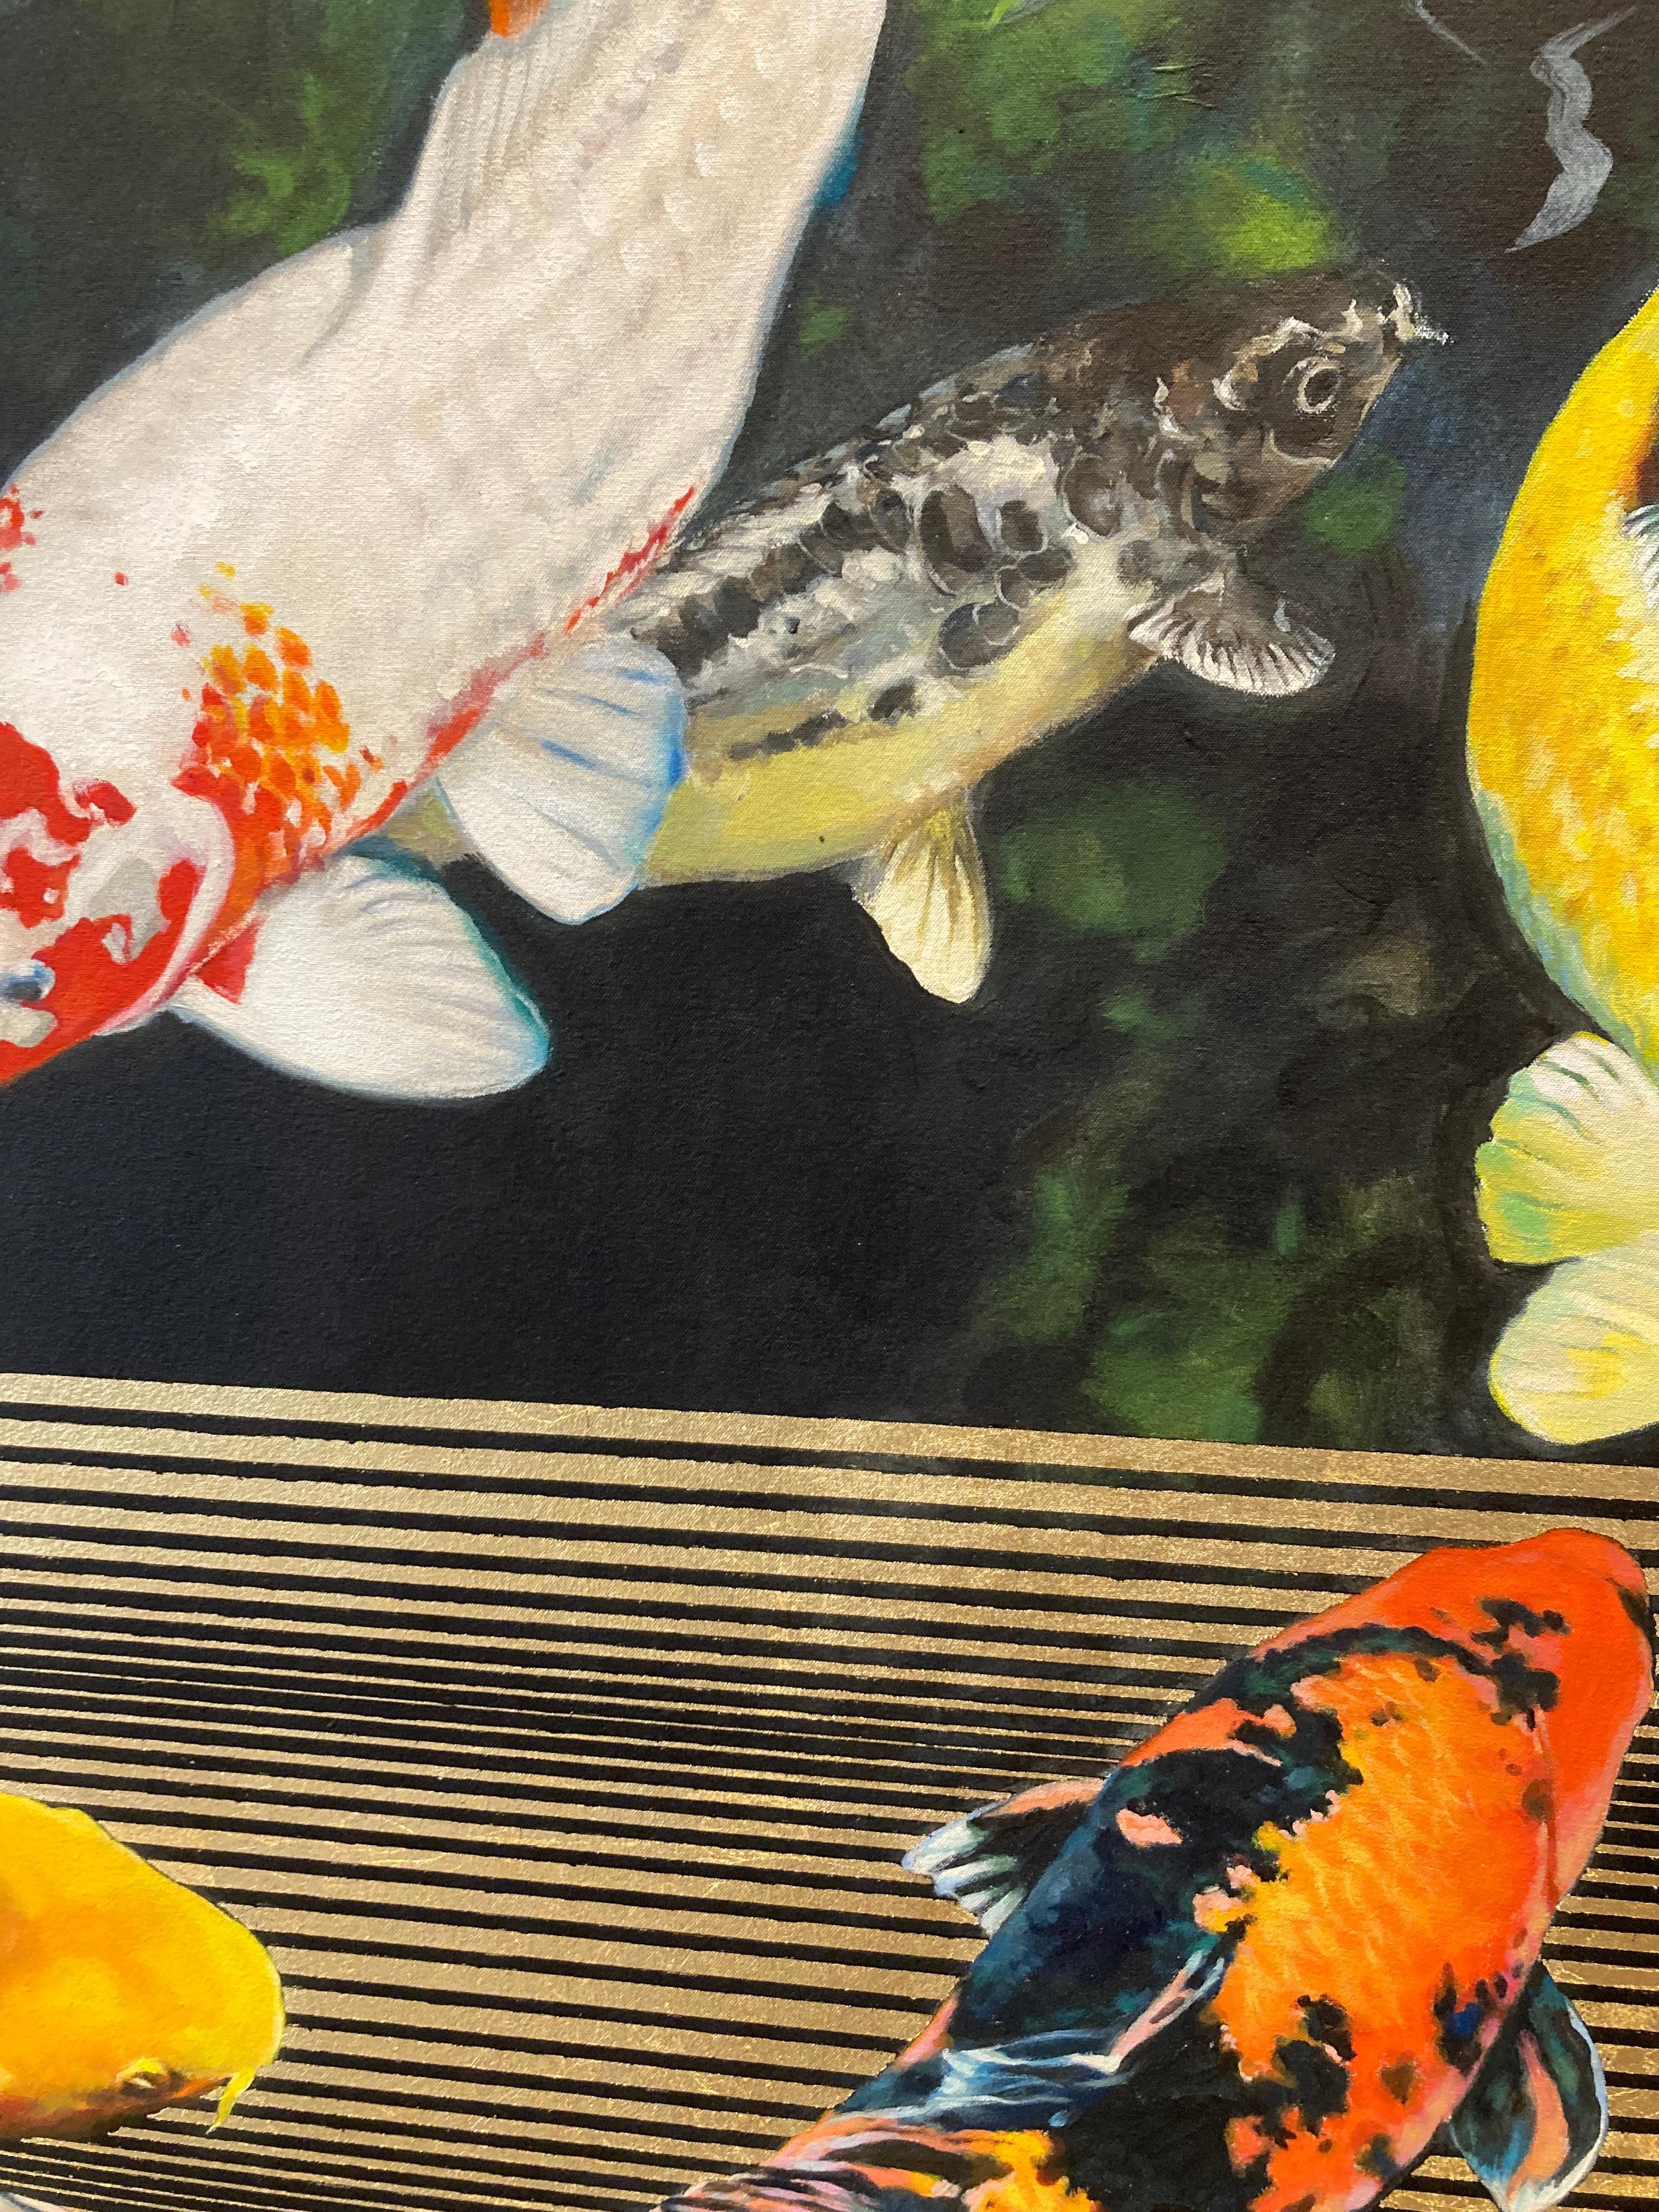 Citius -contemporary decorative koi fish pond golden strips mixed media painting - Contemporary Painting by Keng Wai Lee